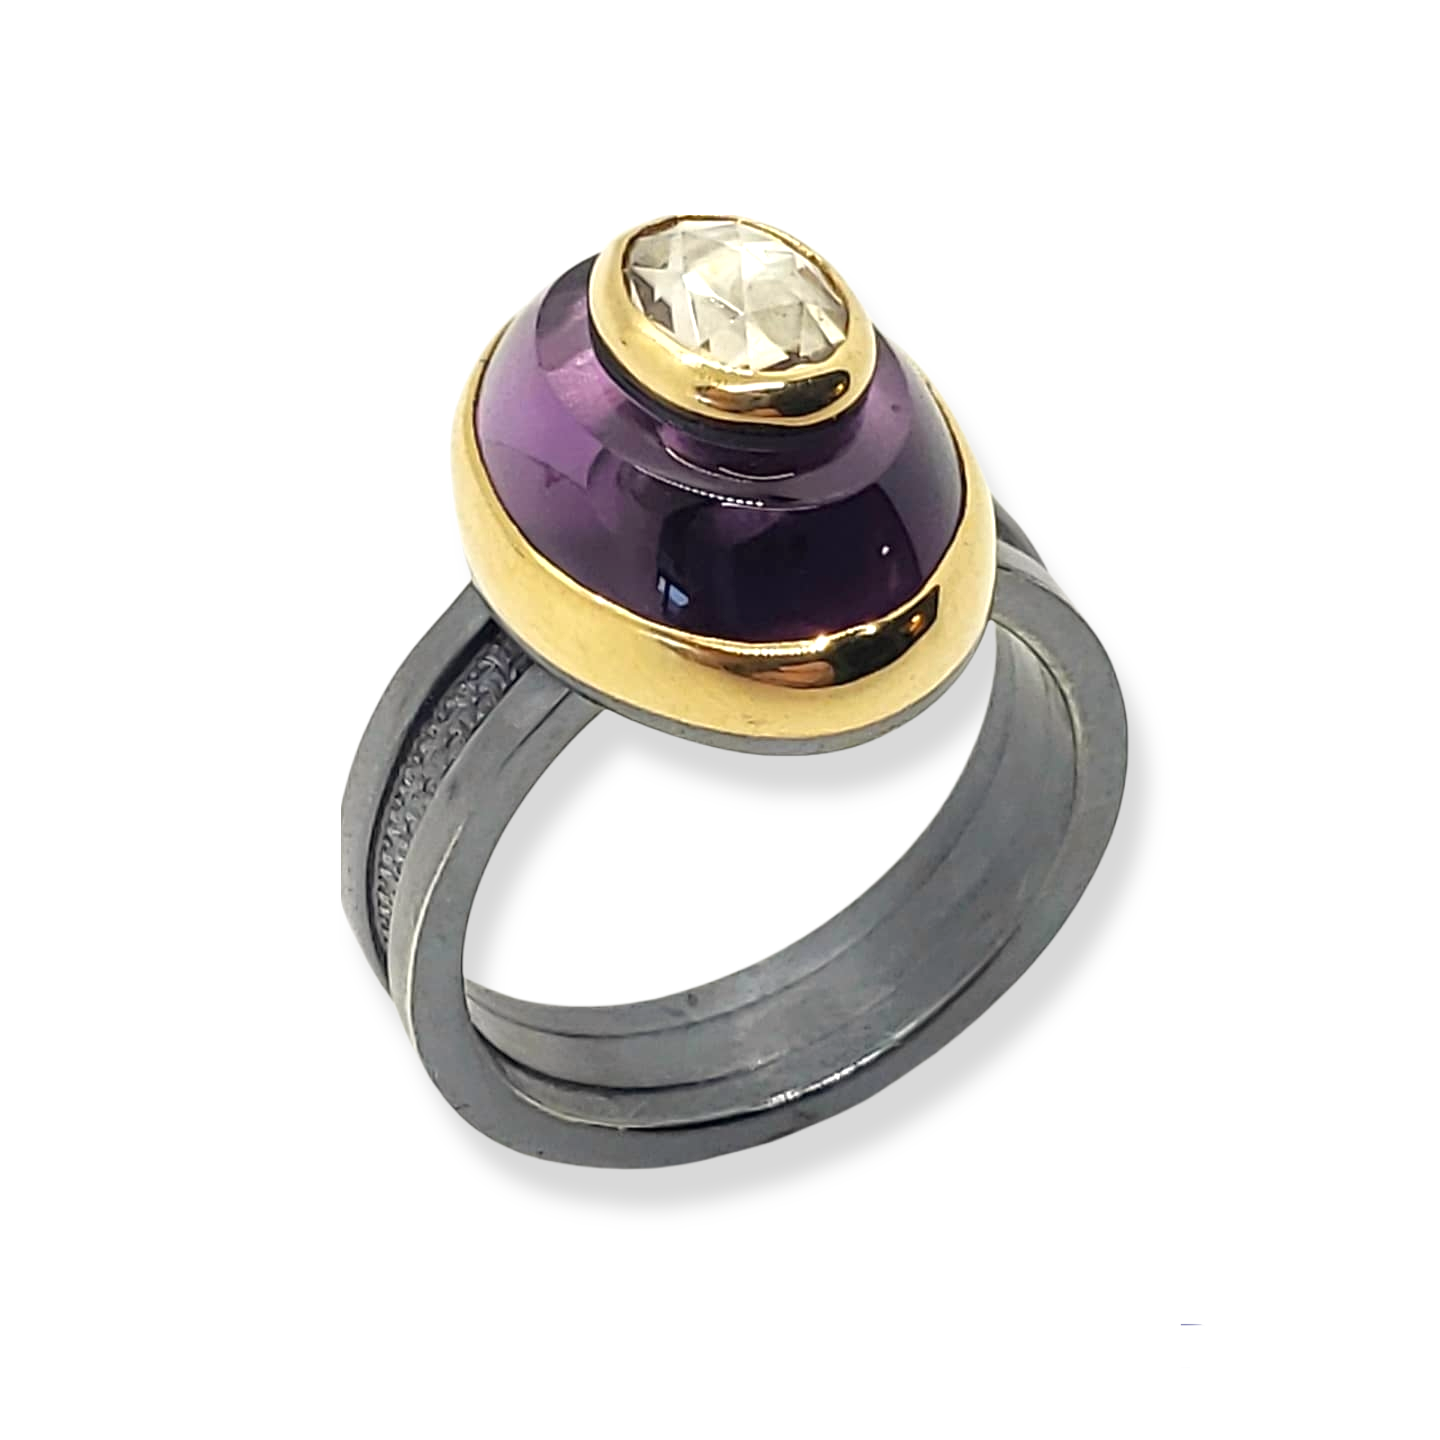 Oxidized Sterling Silver Ring With Amethyst and Rose Cut Zircon